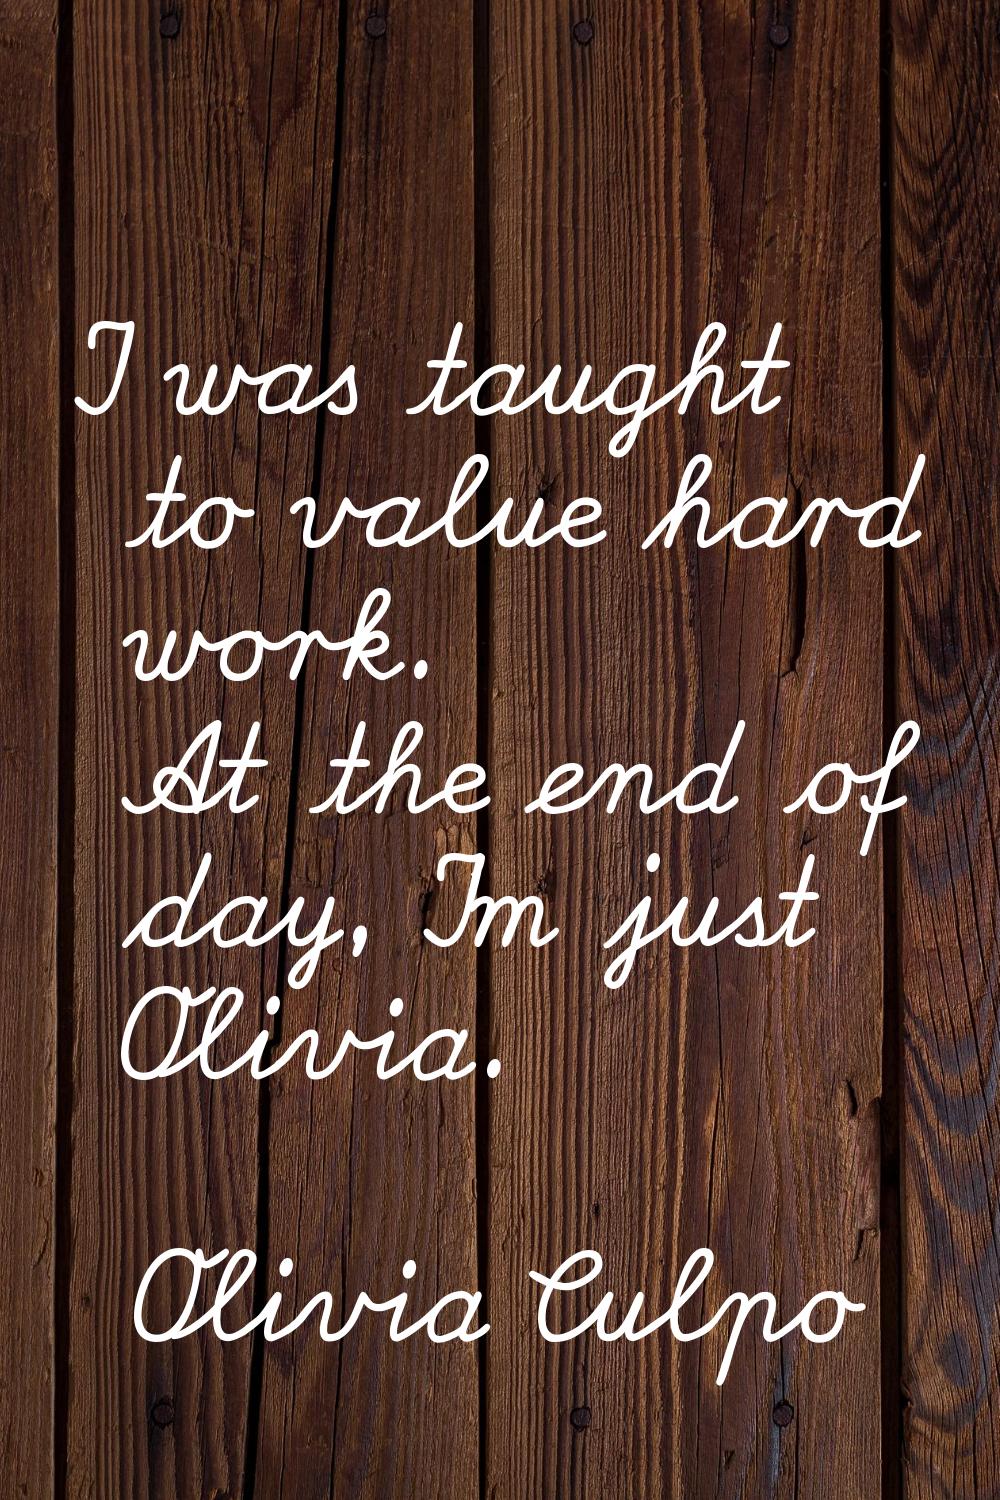 I was taught to value hard work. At the end of day, I'm just Olivia.